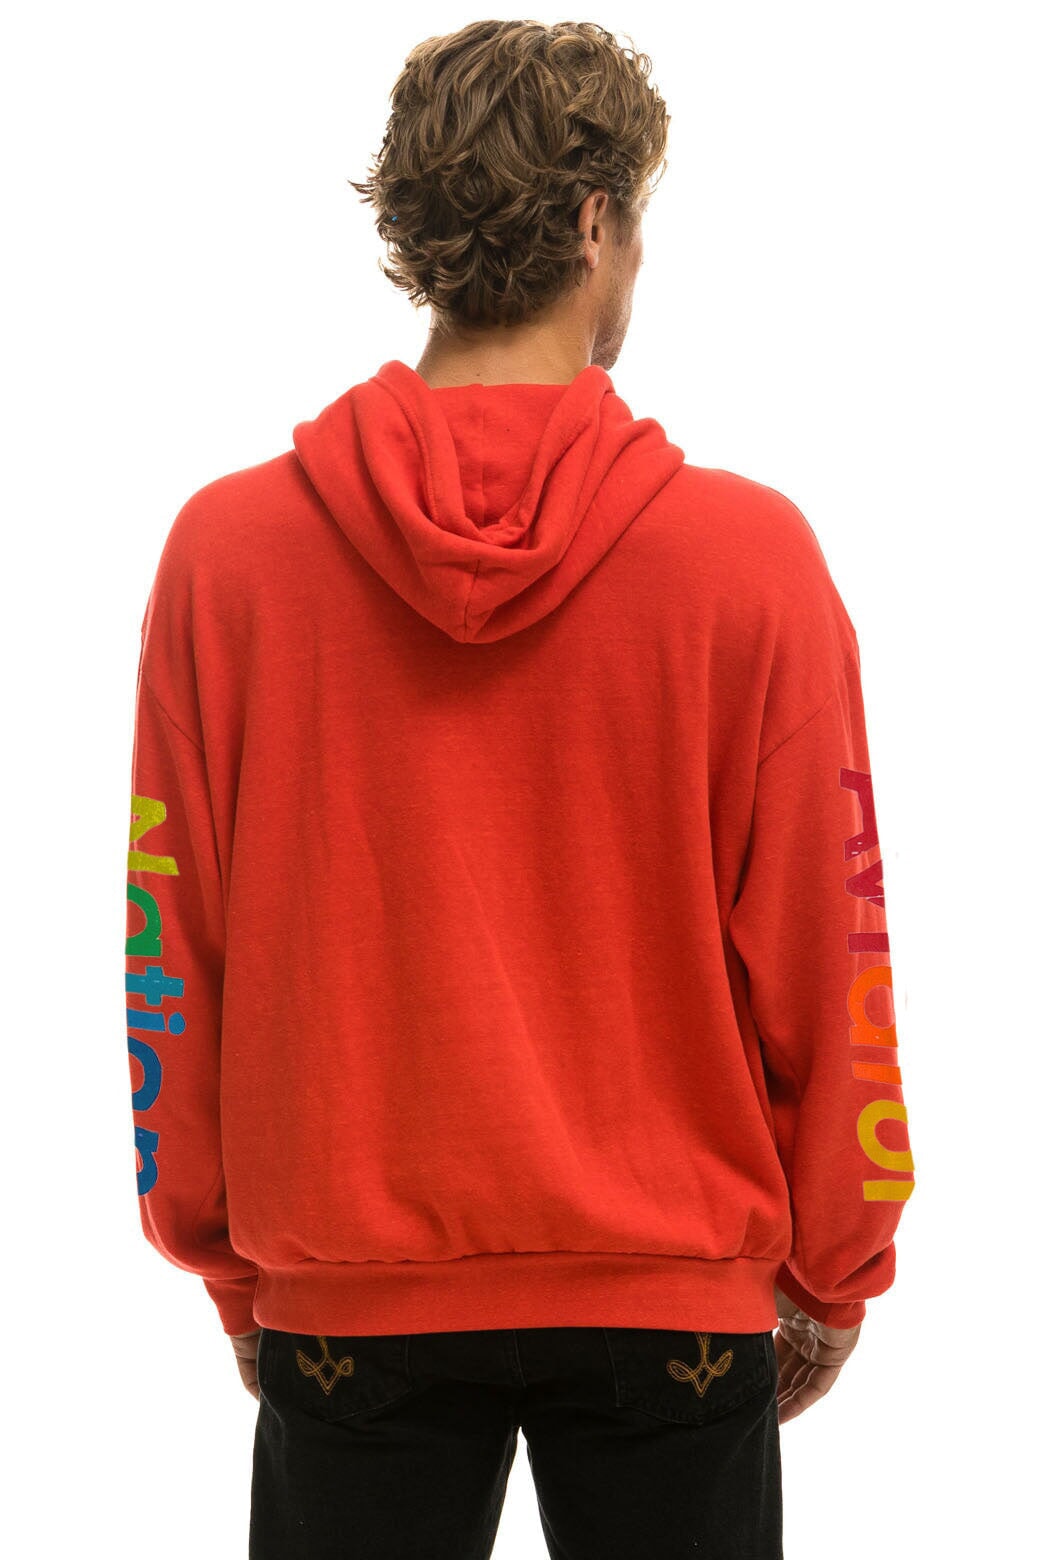 AVIATOR NATION VAIL RELAXED PULLOVER HOODIE - RED Hoodie Aviator Nation 